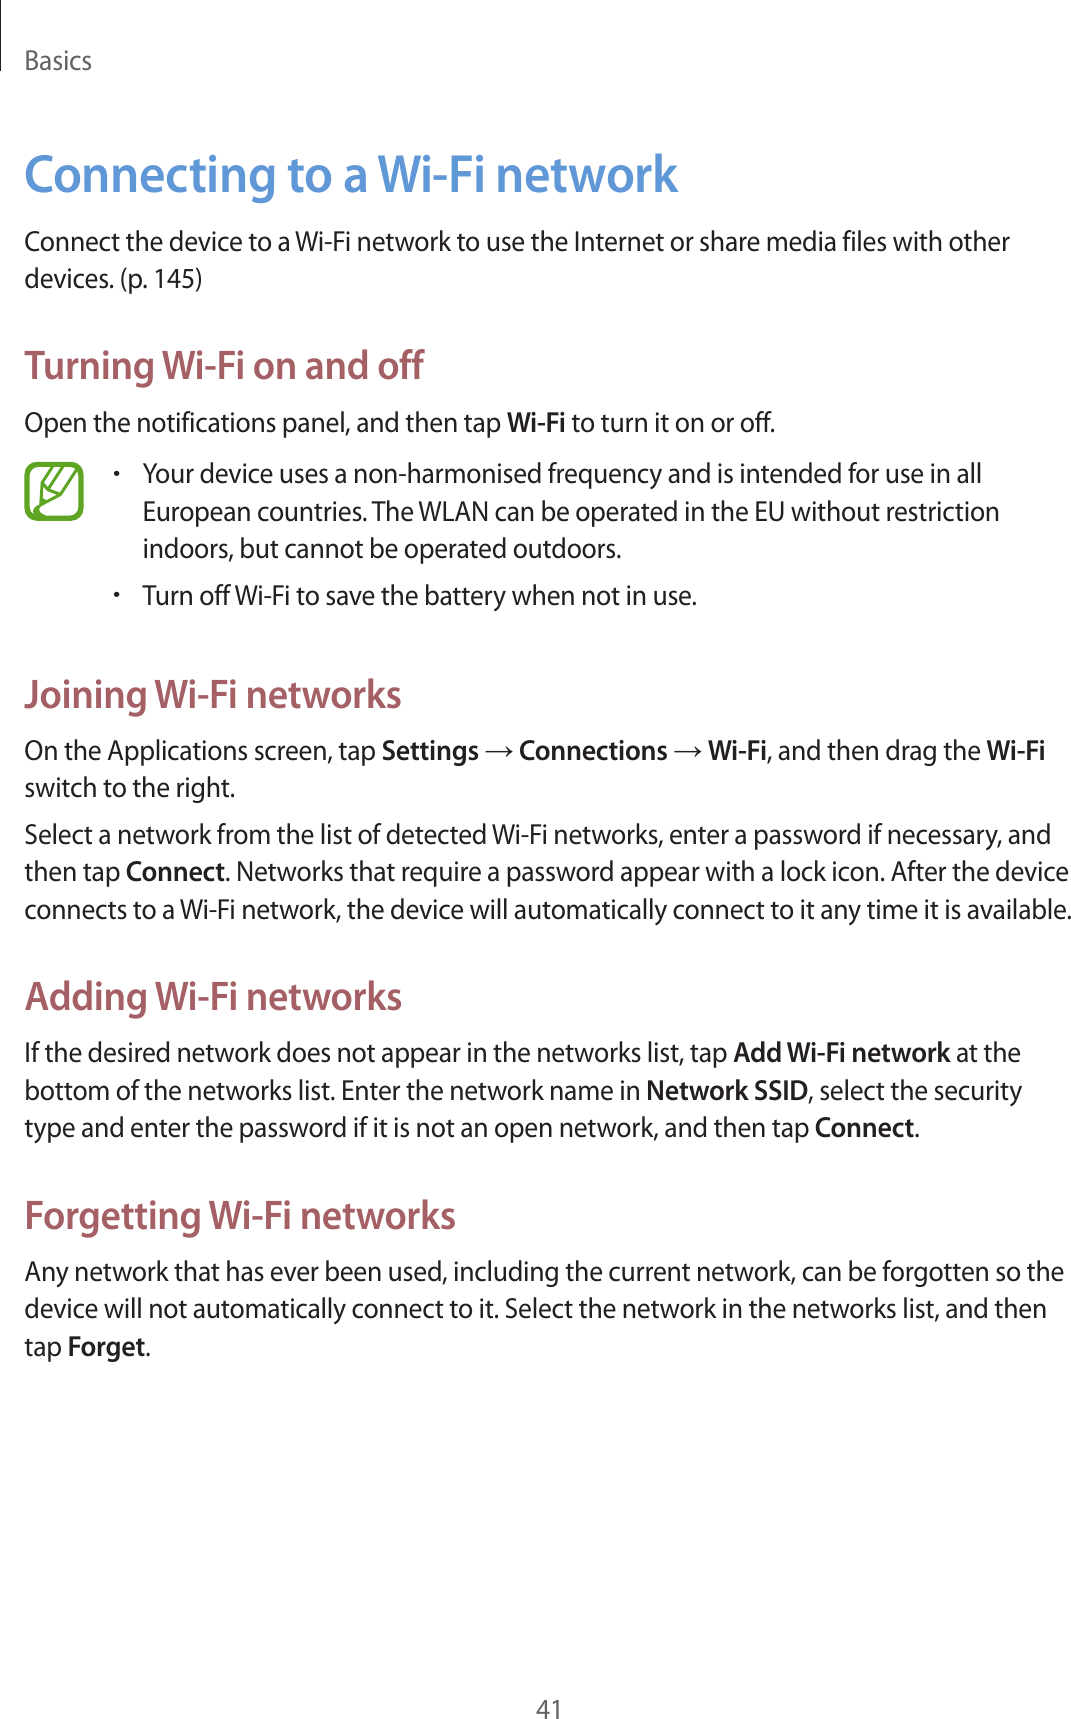 Basics41Connecting to a Wi-Fi networkConnect the device to a Wi-Fi network to use the Internet or share media files with other devices. (p. 145)Turning Wi-Fi on and offOpen the notifications panel, and then tap Wi-Fi to turn it on or off.•Your device uses a non-harmonised frequency and is intended for use in all European countries. The WLAN can be operated in the EU without restriction indoors, but cannot be operated outdoors.•Turn off Wi-Fi to save the battery when not in use.Joining Wi-Fi networksOn the Applications screen, tap Settings → Connections → Wi-Fi, and then drag the Wi-Fi switch to the right.Select a network from the list of detected Wi-Fi networks, enter a password if necessary, and then tap Connect. Networks that require a password appear with a lock icon. After the device connects to a Wi-Fi network, the device will automatically connect to it any time it is available.Adding Wi-Fi networksIf the desired network does not appear in the networks list, tap Add Wi-Fi network at the bottom of the networks list. Enter the network name in Network SSID, select the security type and enter the password if it is not an open network, and then tap Connect.Forgetting Wi-Fi networksAny network that has ever been used, including the current network, can be forgotten so the device will not automatically connect to it. Select the network in the networks list, and then tap Forget.